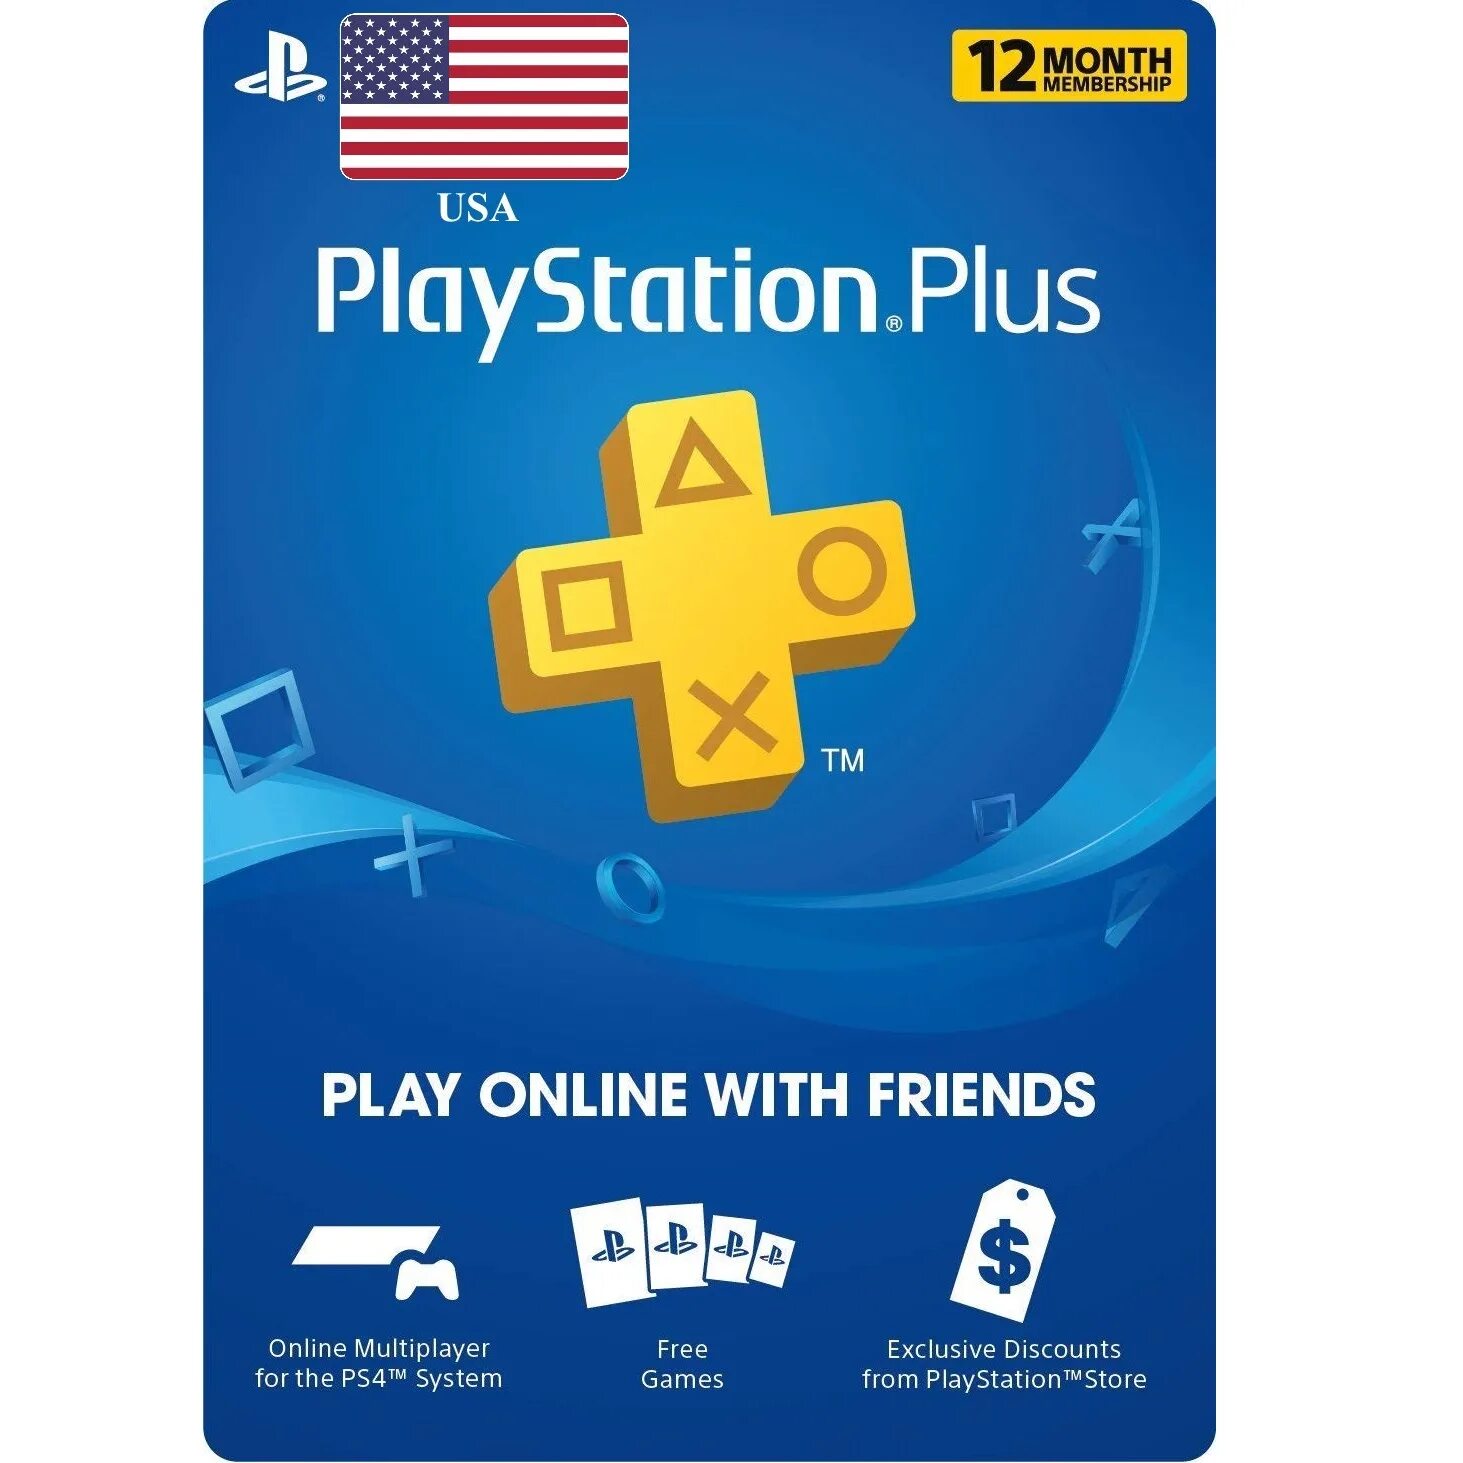 Подписка Sony PLAYSTATION Plus. PLAYSTATION Plus Extra Essential Premium Deluxe. PS Plus 3months. Подписка PS Plus на 12 месяцев Делюкс. Playstation turkey ps plus